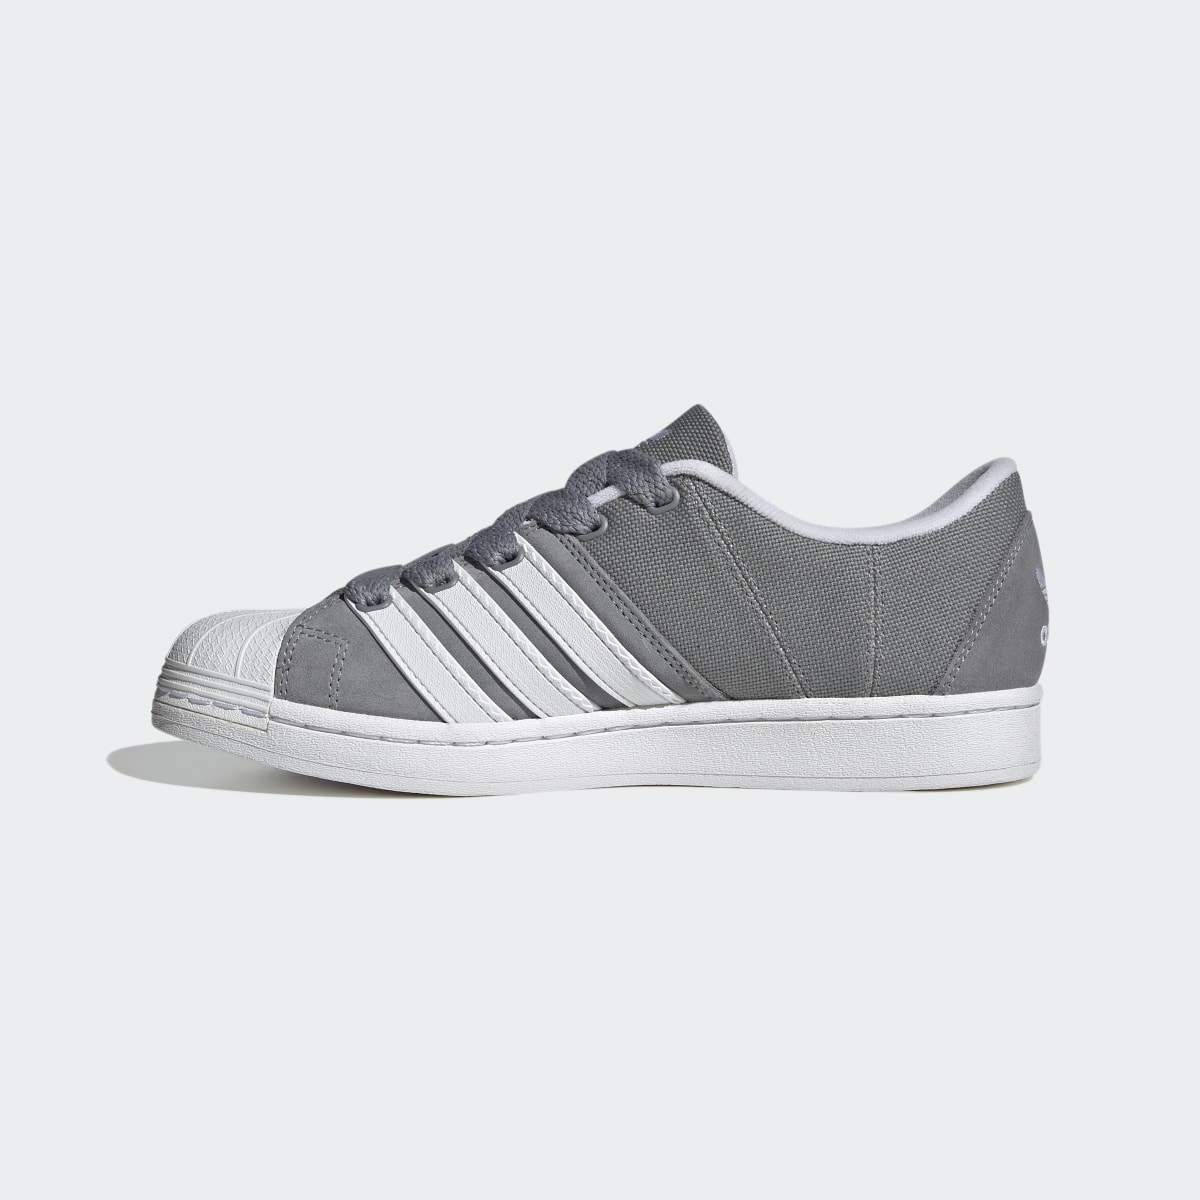 Adidas Superstar Supermodified Shoes. 9